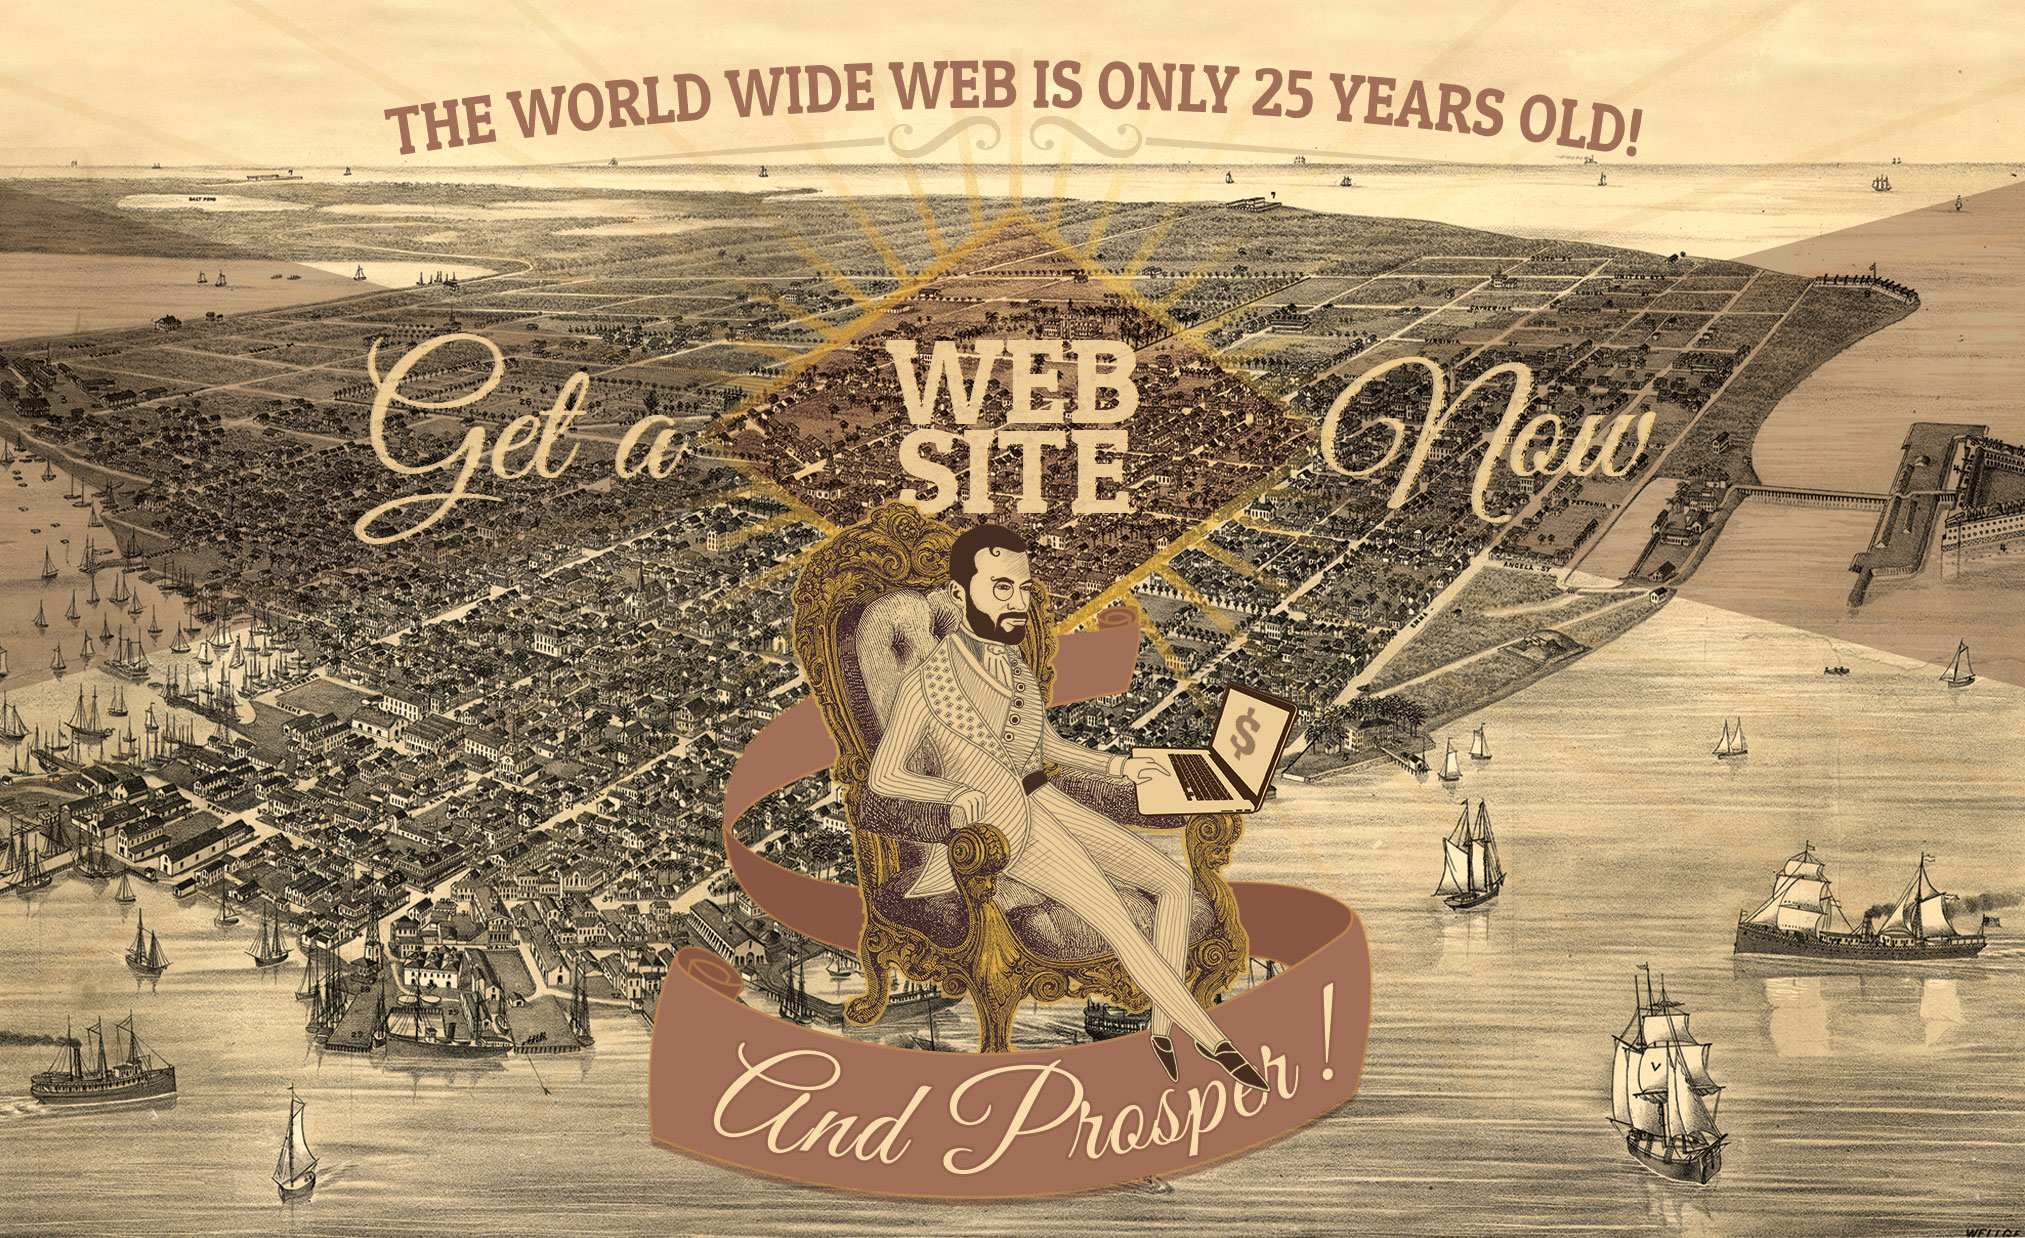 Map of old Key West promoting web design. The ad says: The World Wide Web is Only 25 Years Old! Get a Website Now and prosper. A rich looking man engraved in a illustration is siting in a fancy gold chair over Key West